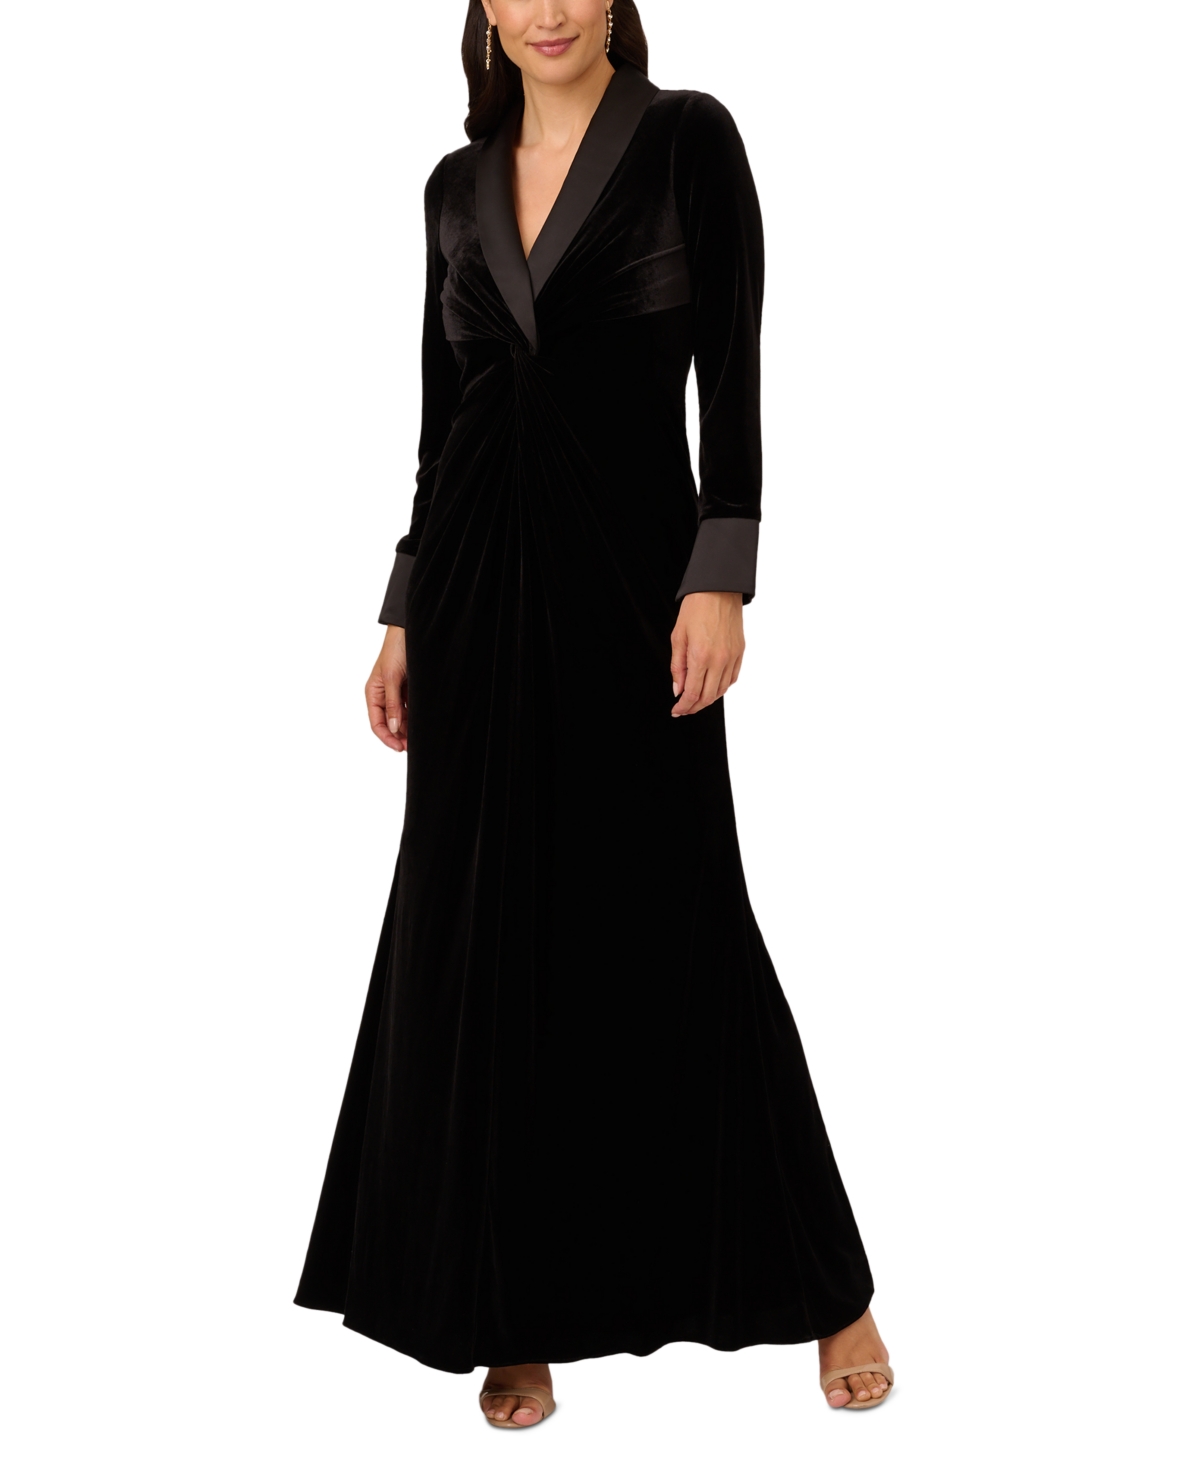 1950s Formal Dresses & Evening Gowns to Buy Adrianna Papell Womens Velvet Twist-Front Tuxedo Gown - Black $219.00 AT vintagedancer.com